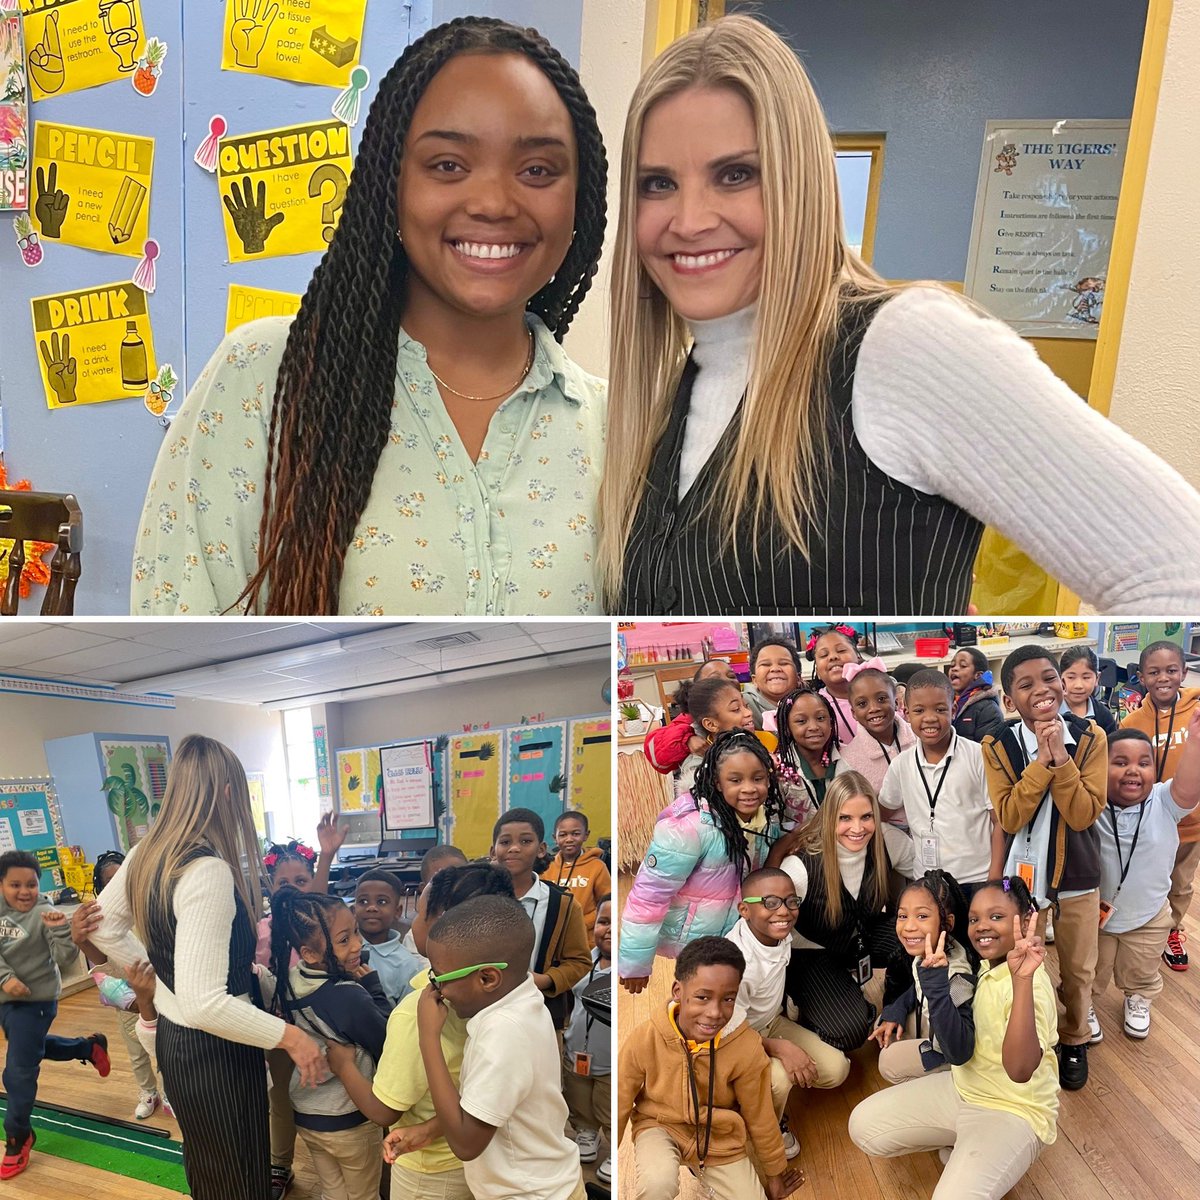 MPS Teacher Residency participant, Ms. Richardson, is a shining star! Her students made amazing gains in mathematics. Thanks for your hard work and for letting me spend time with your students today!! @MPSAL @SuptMJBrown @sledwell #TheresmorewithMPS